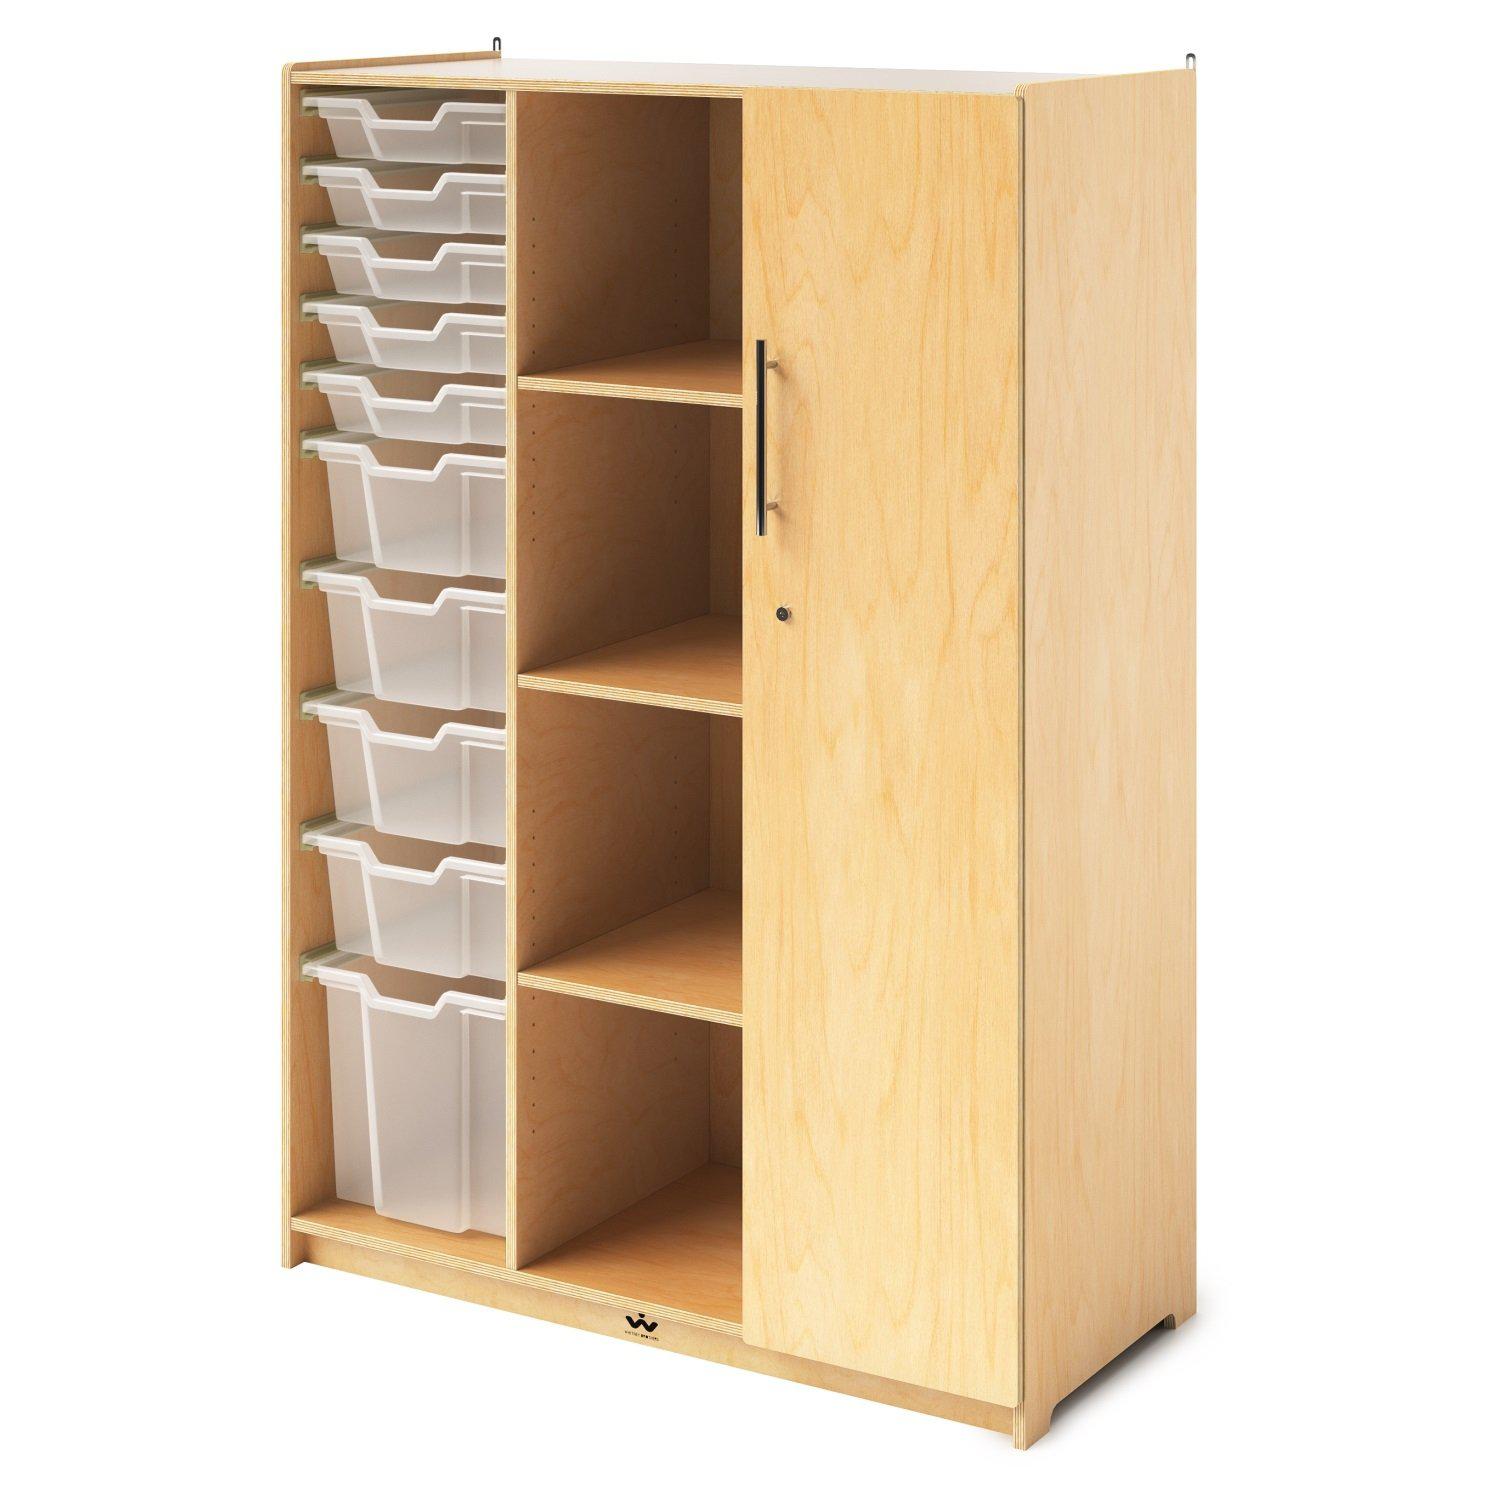 Teacher's Collection Wardrobe With Trays and Locking Door